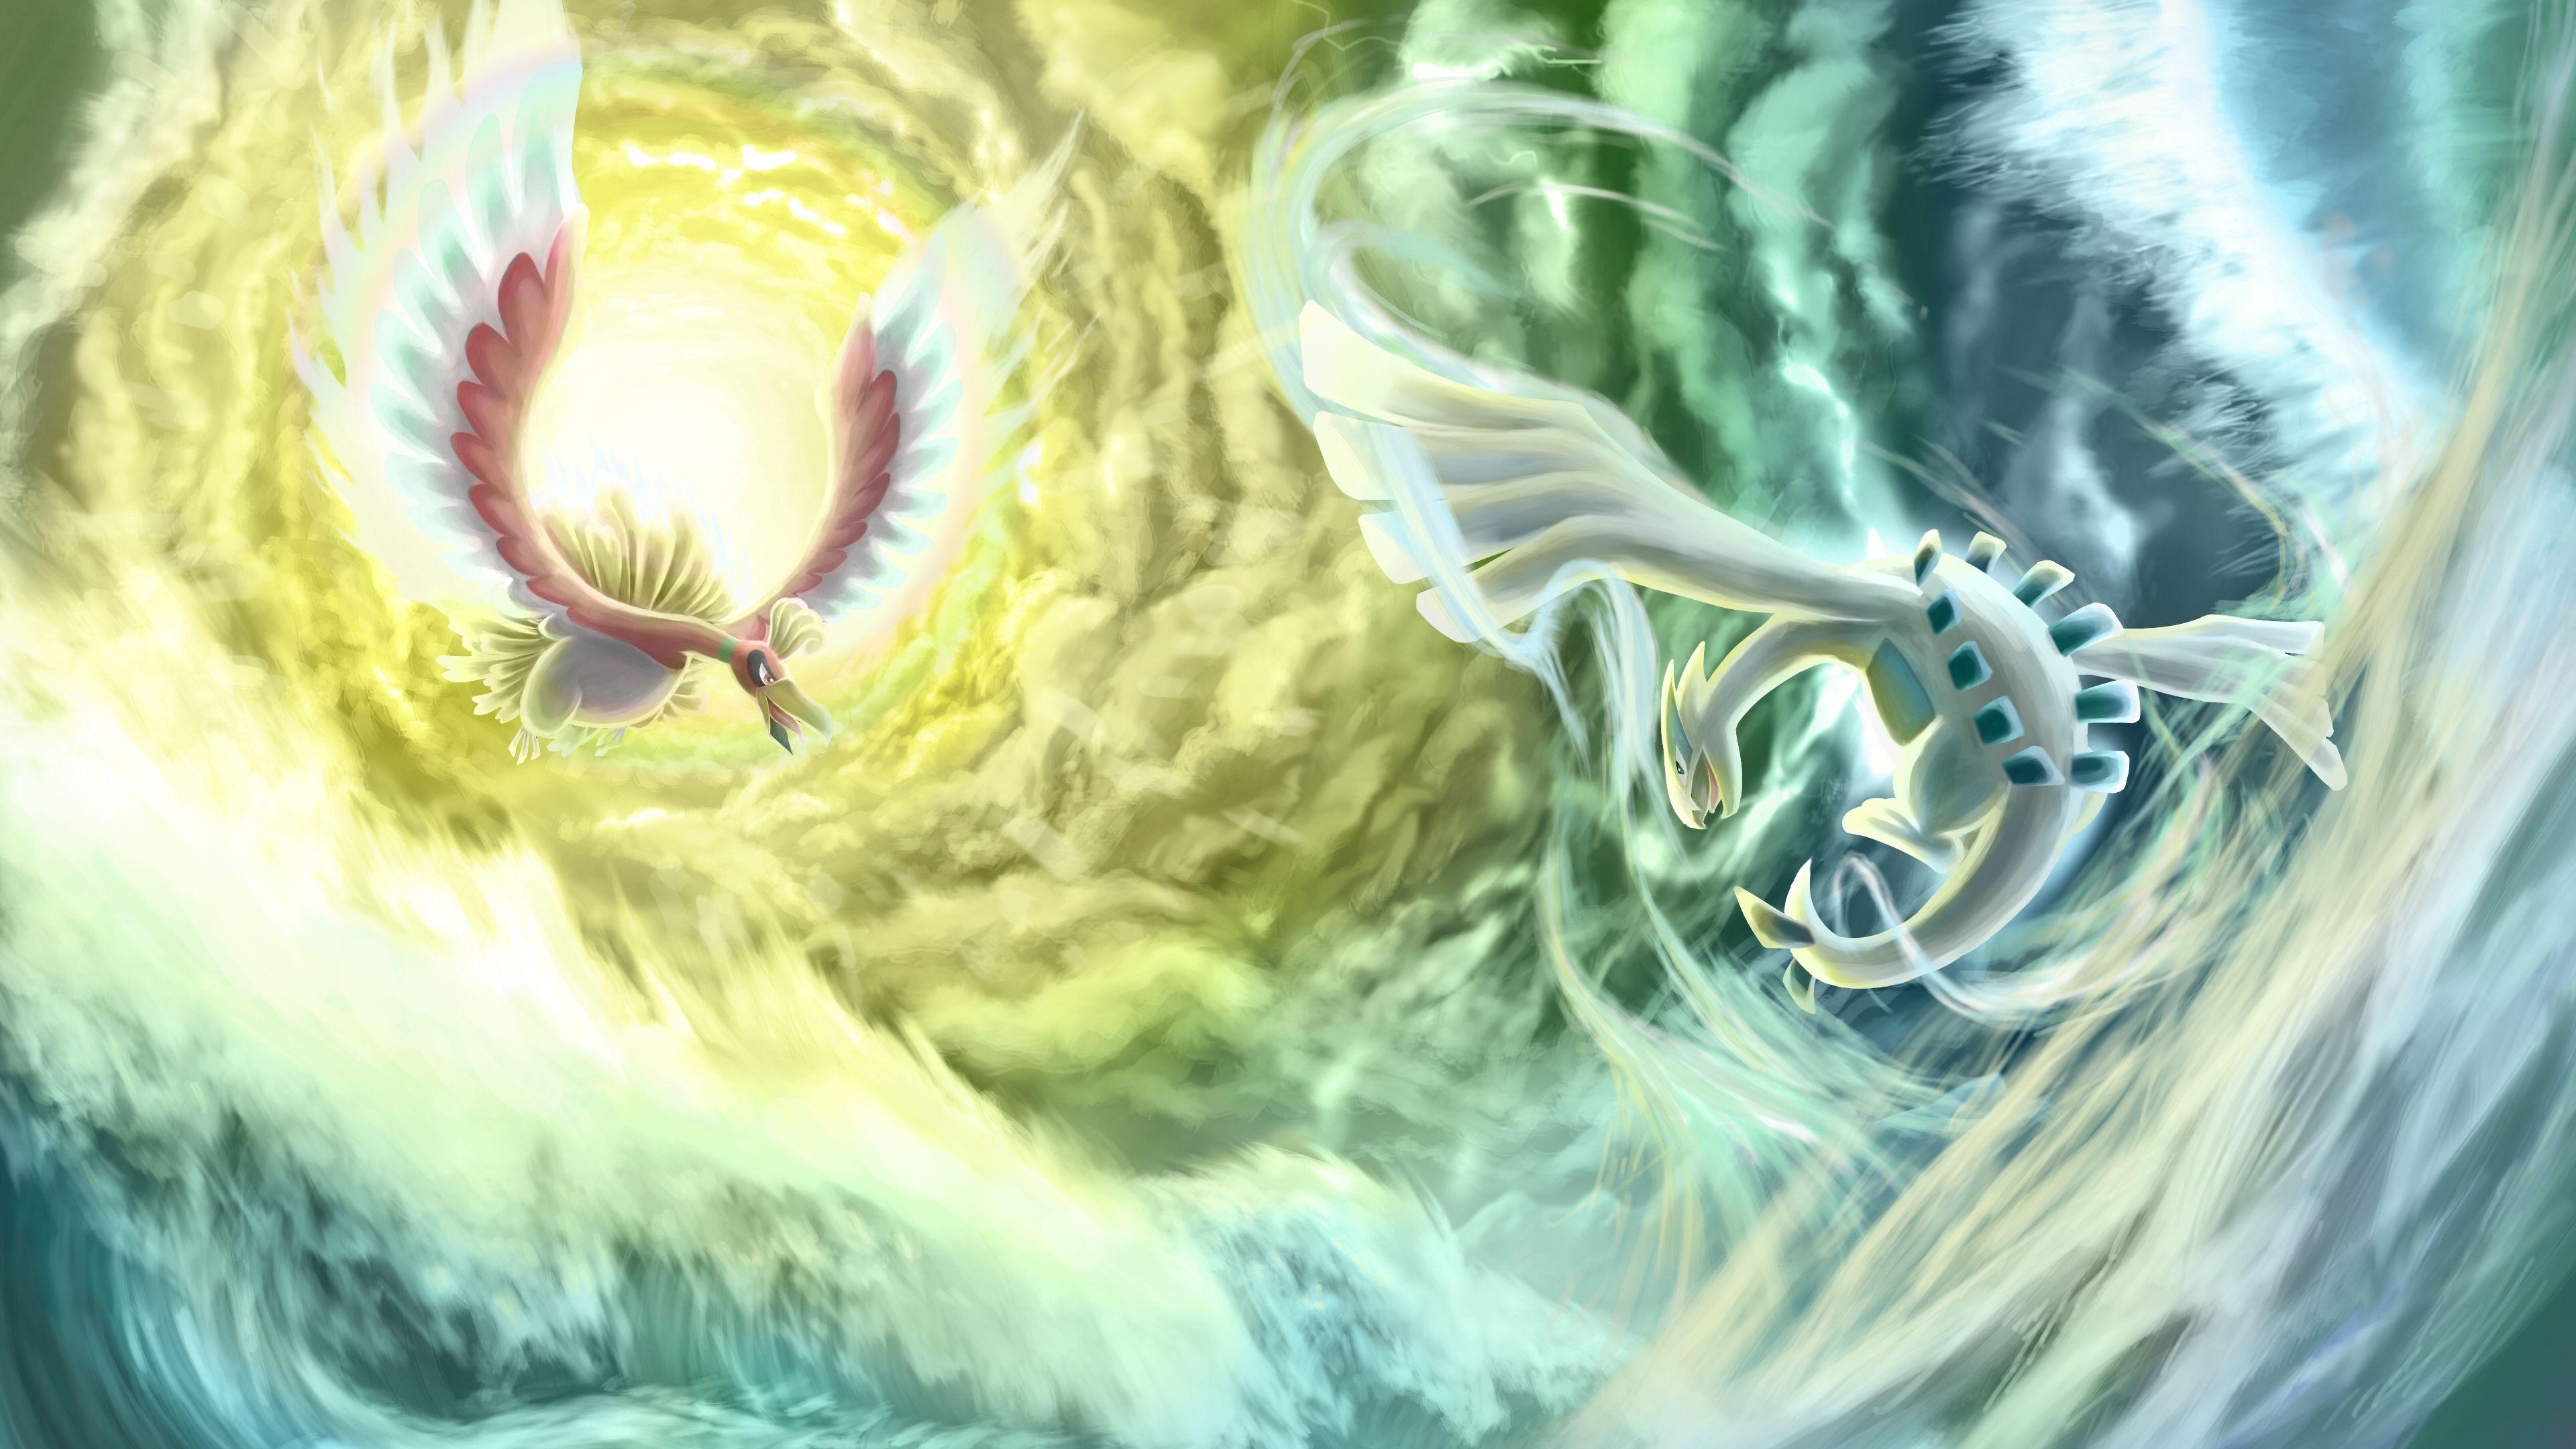 HO OH and Lugia Wallpaper